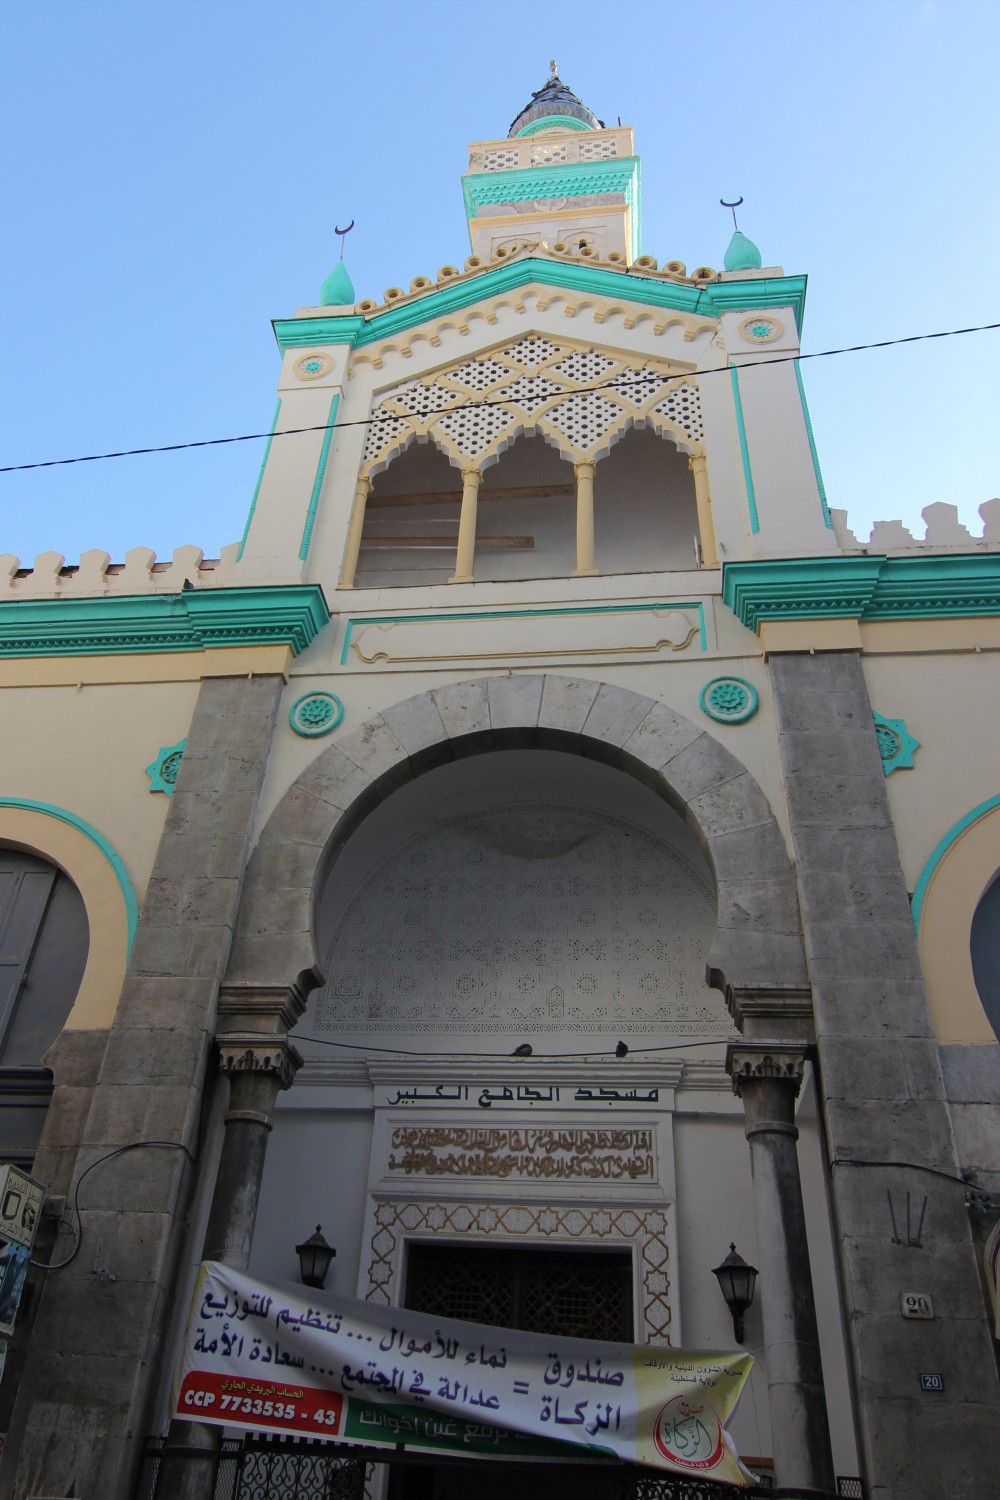 Exterior view showing the main entrance and the top of the minaret